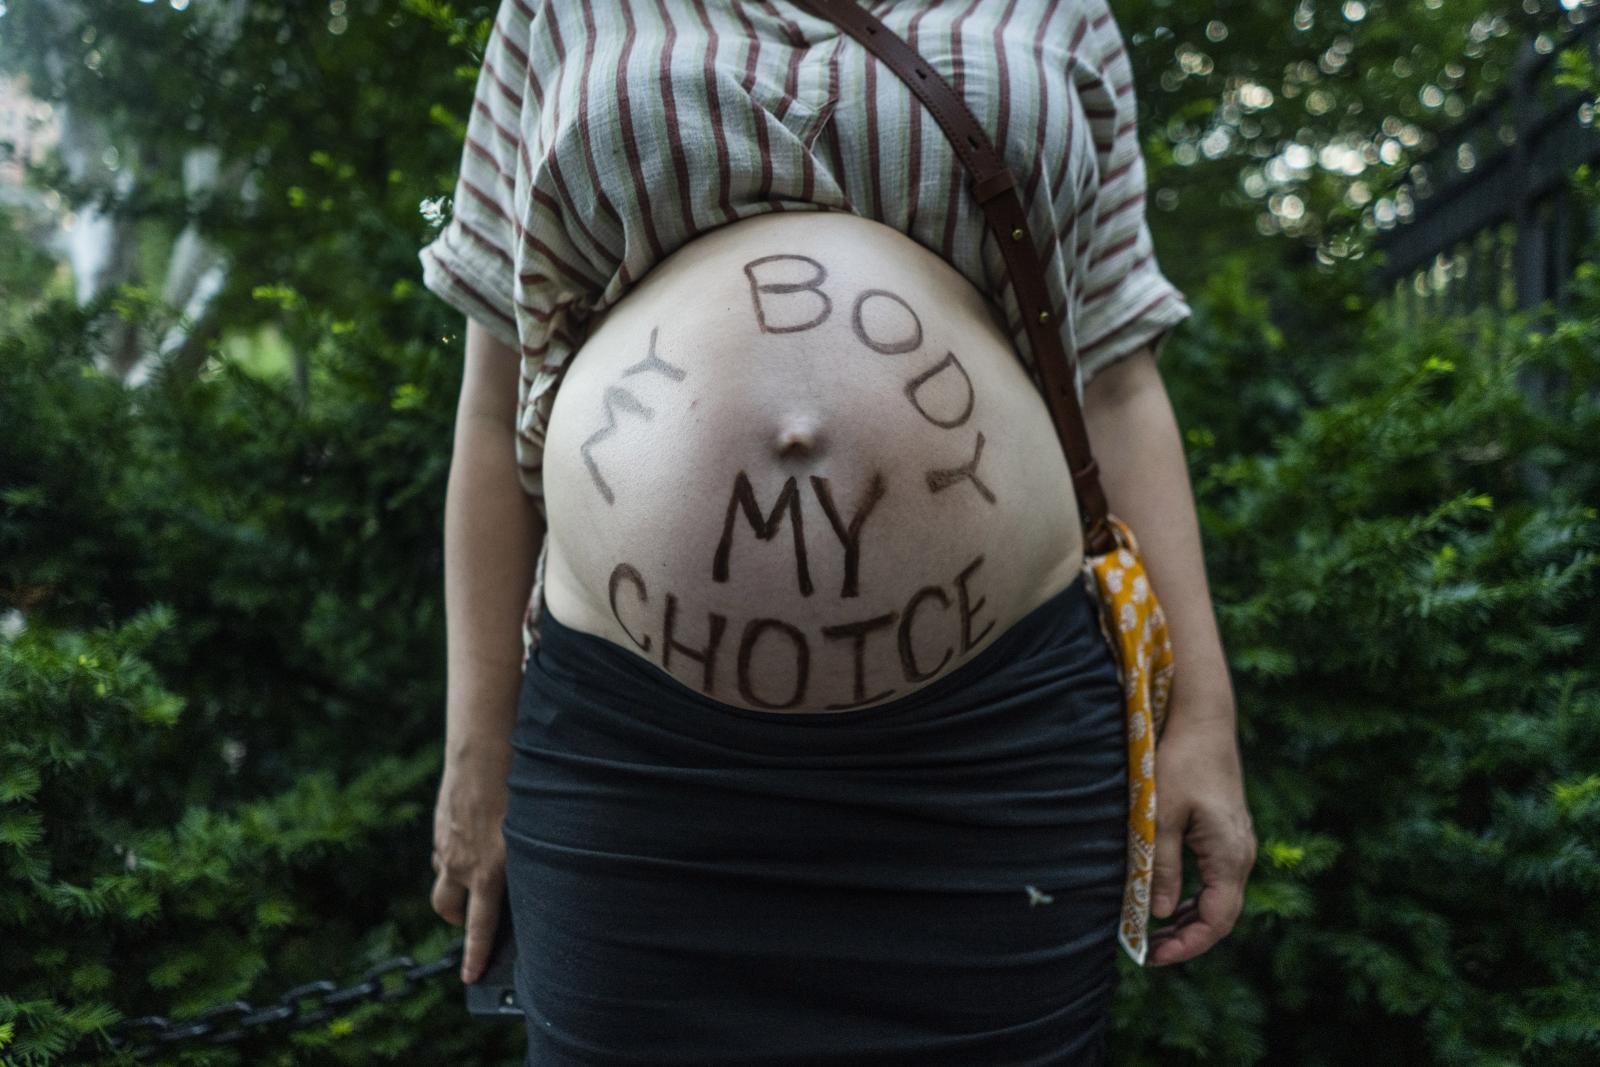 A woman has &quot;My Body, ...ions as a constitutional right.